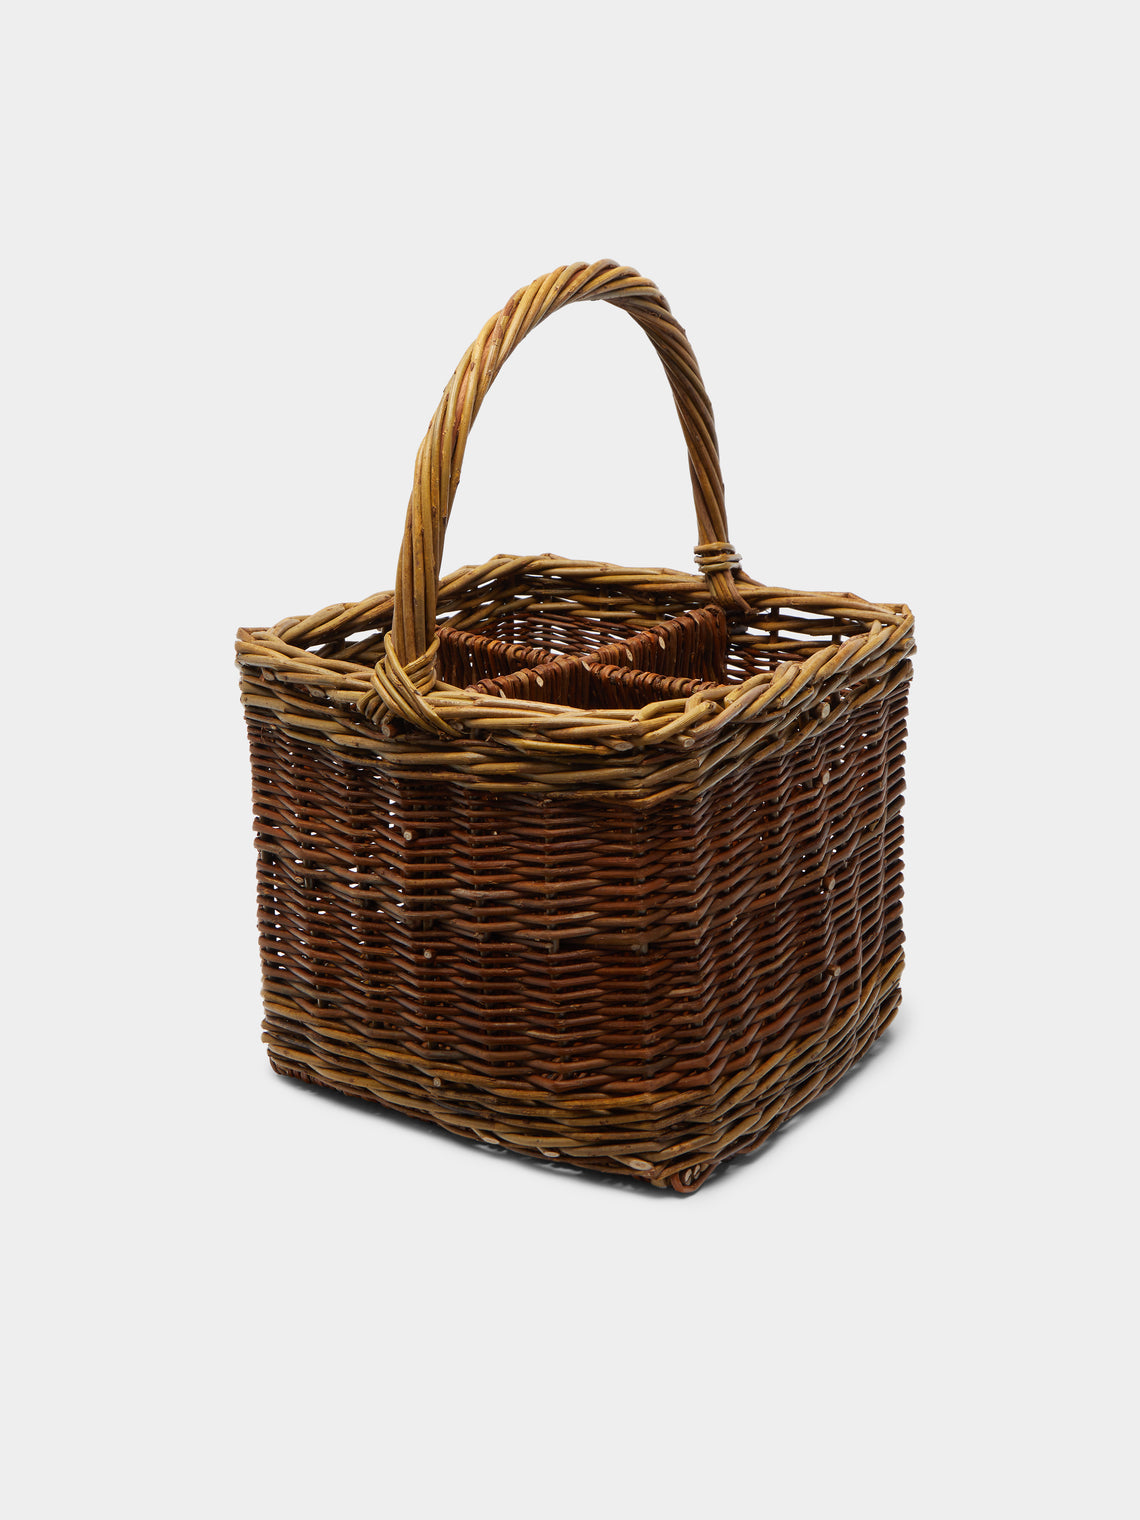 Sussex Willow Baskets - Handwoven Willow Bottle Carrier -  - ABASK - 